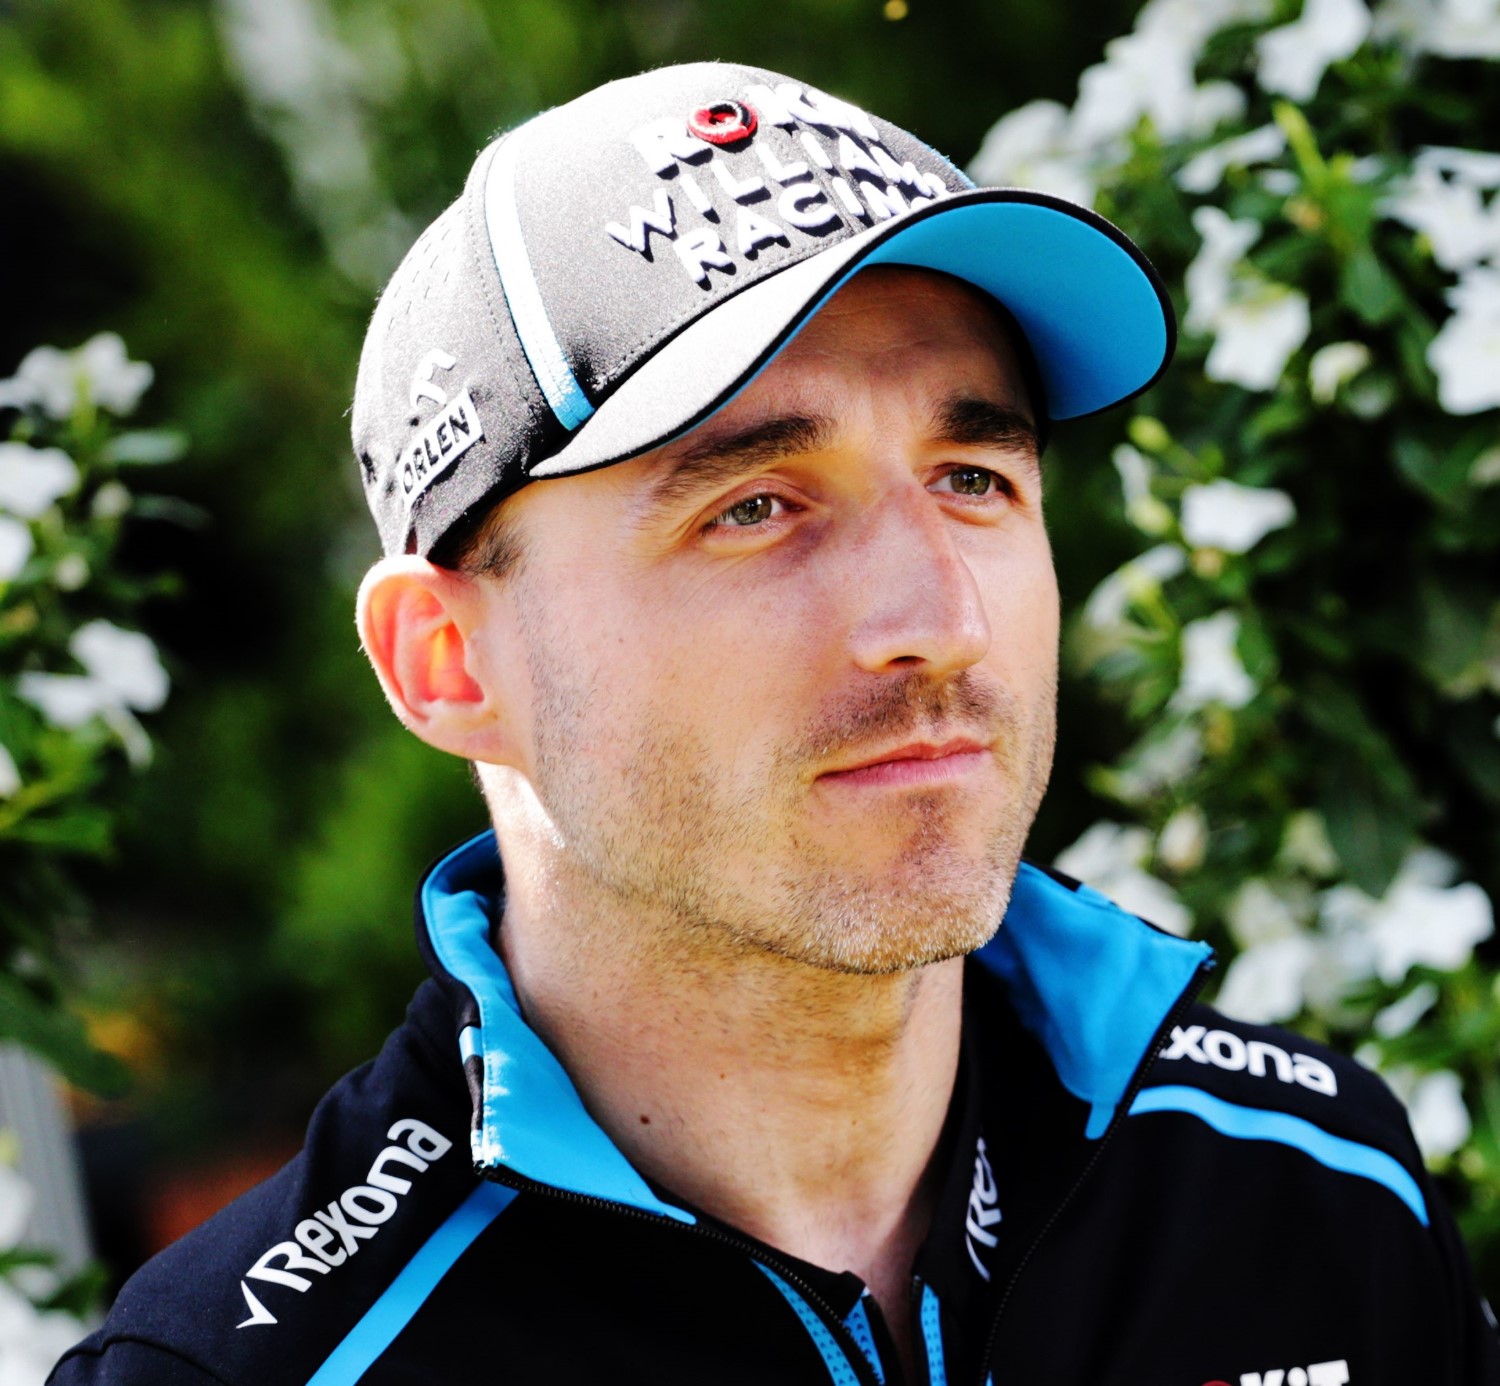 Robert Kubica is just too slow with his damaged arm